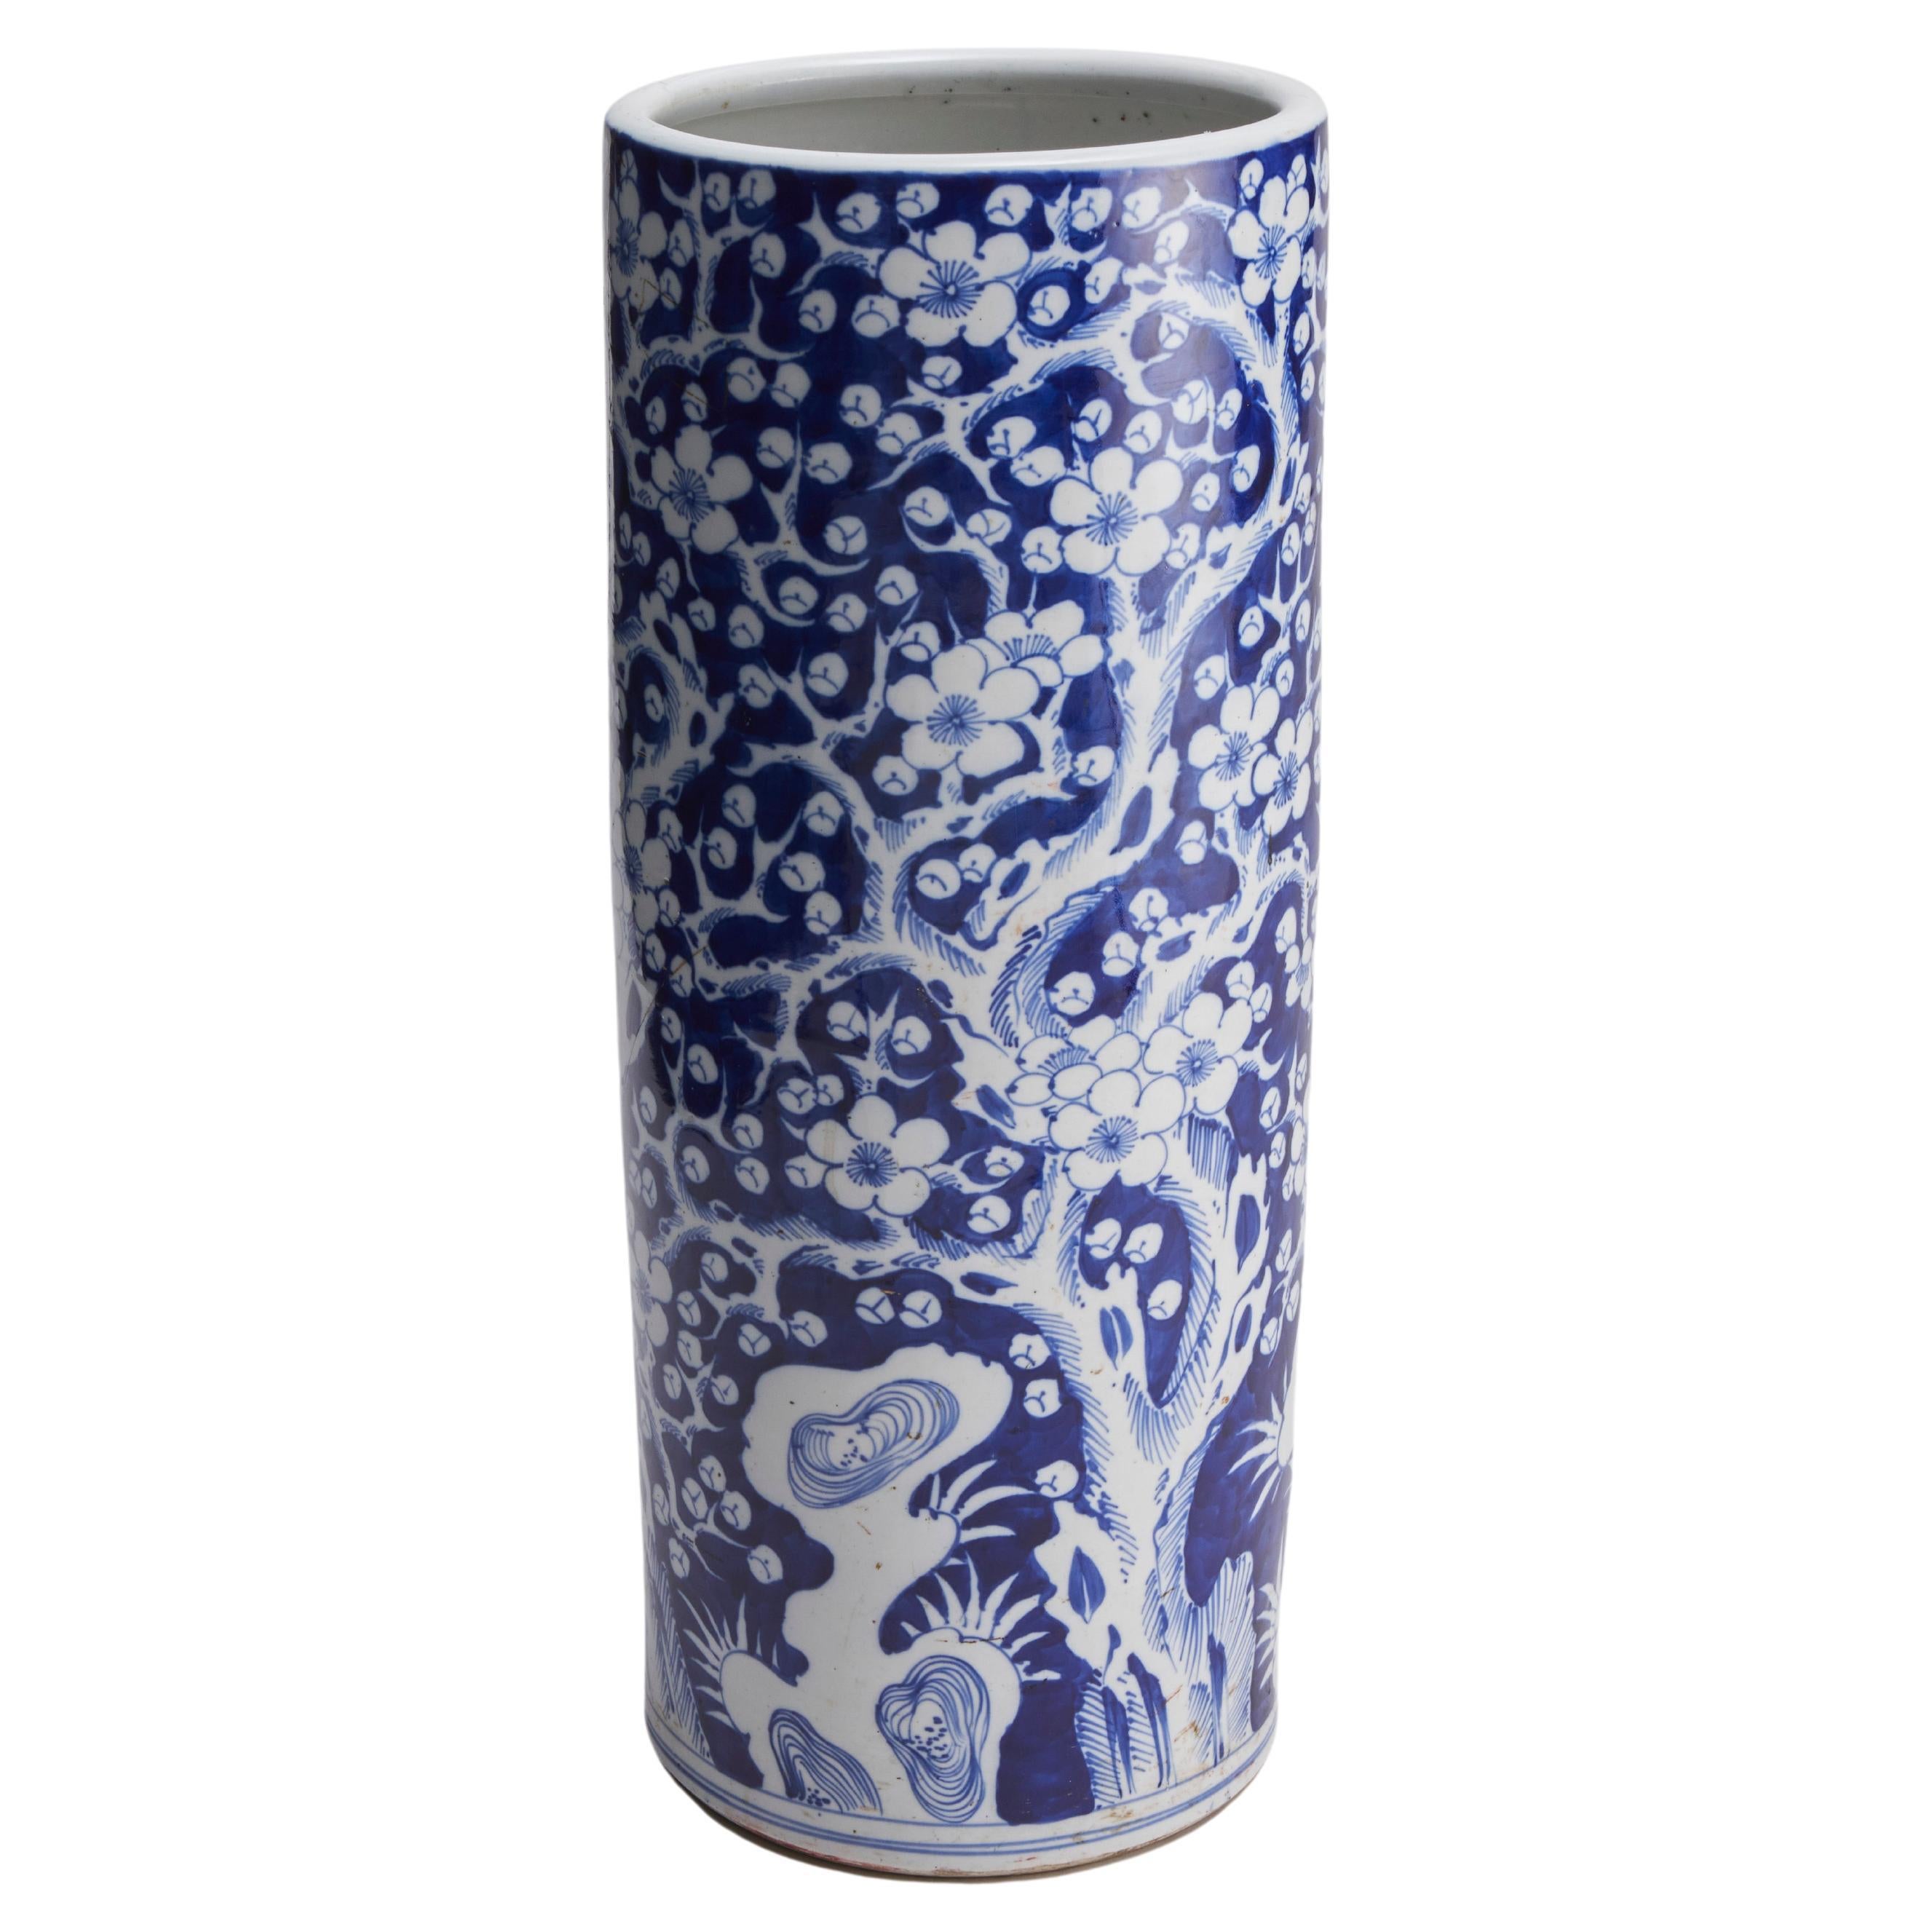 An attractive, late 19th Century Chinese porcelain blue and white Umbrella stand